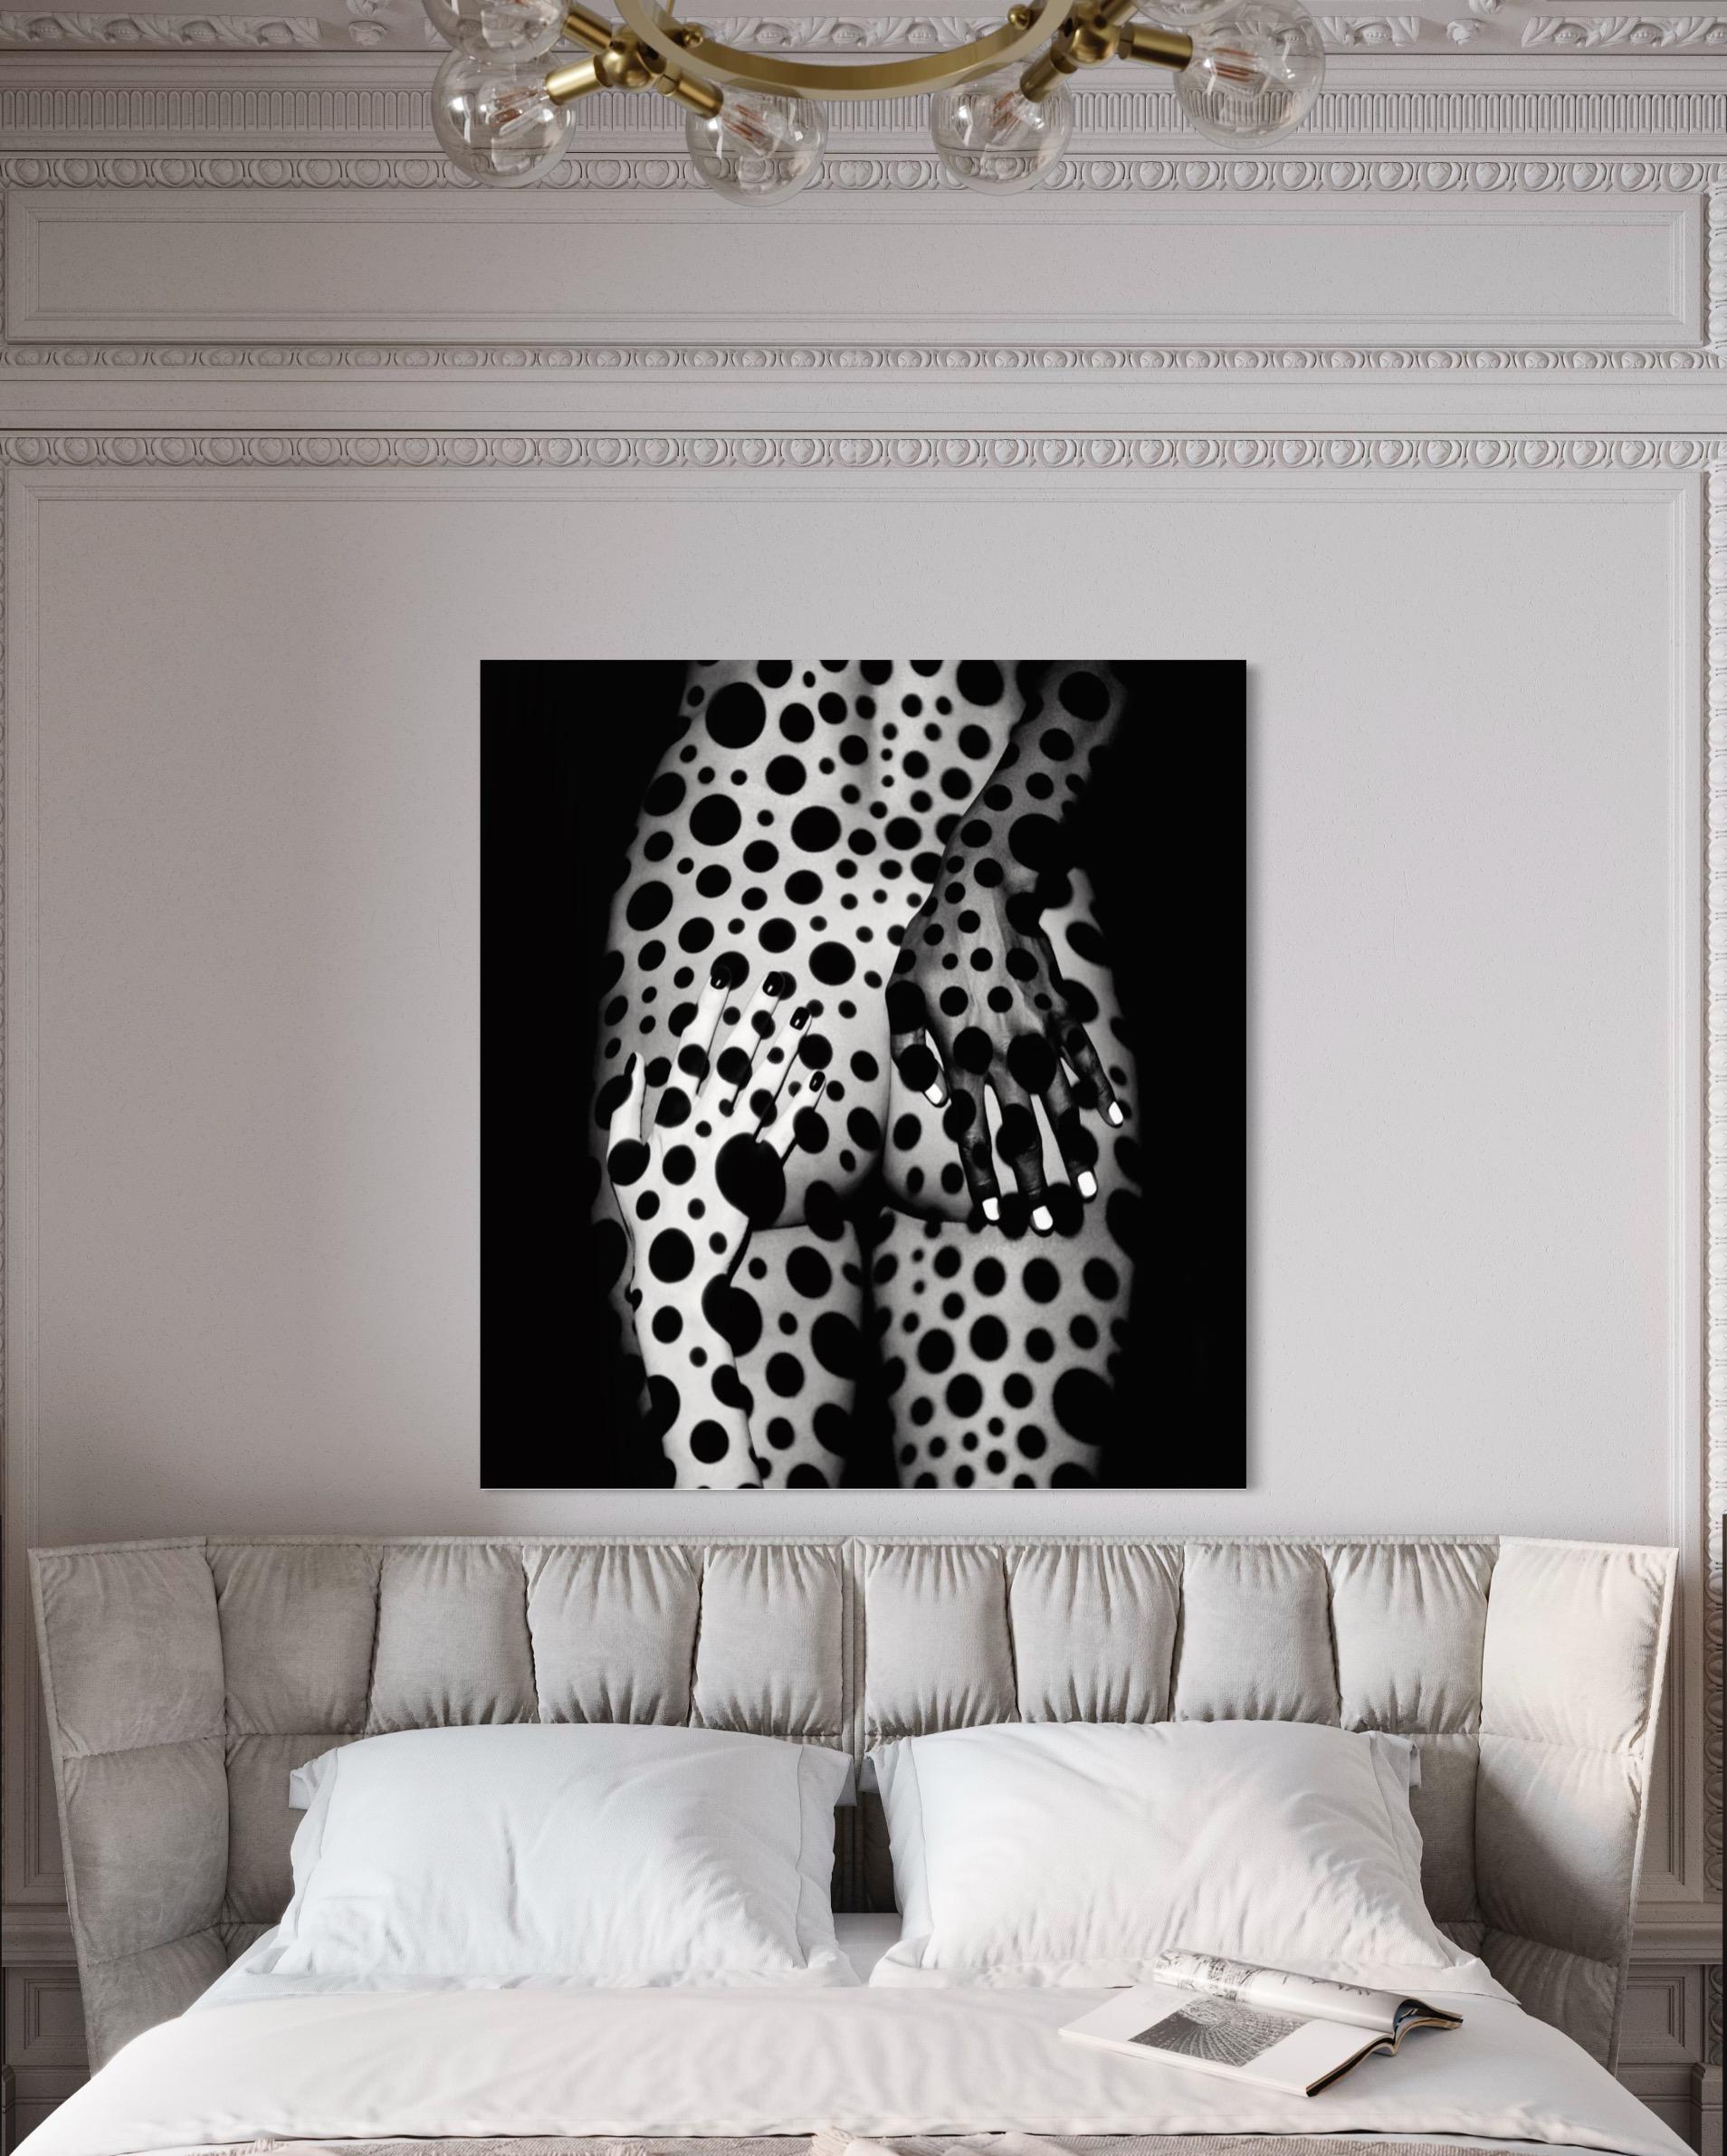 MODERNISMO - LIMITED EDIITON OF 10 - SIGNED ON THE FRONT

Pure photography, inspired by the historically significant pop art and the undulating forms of the nude human body. The pattern takes focal priority as the lines of the body some the canvas.